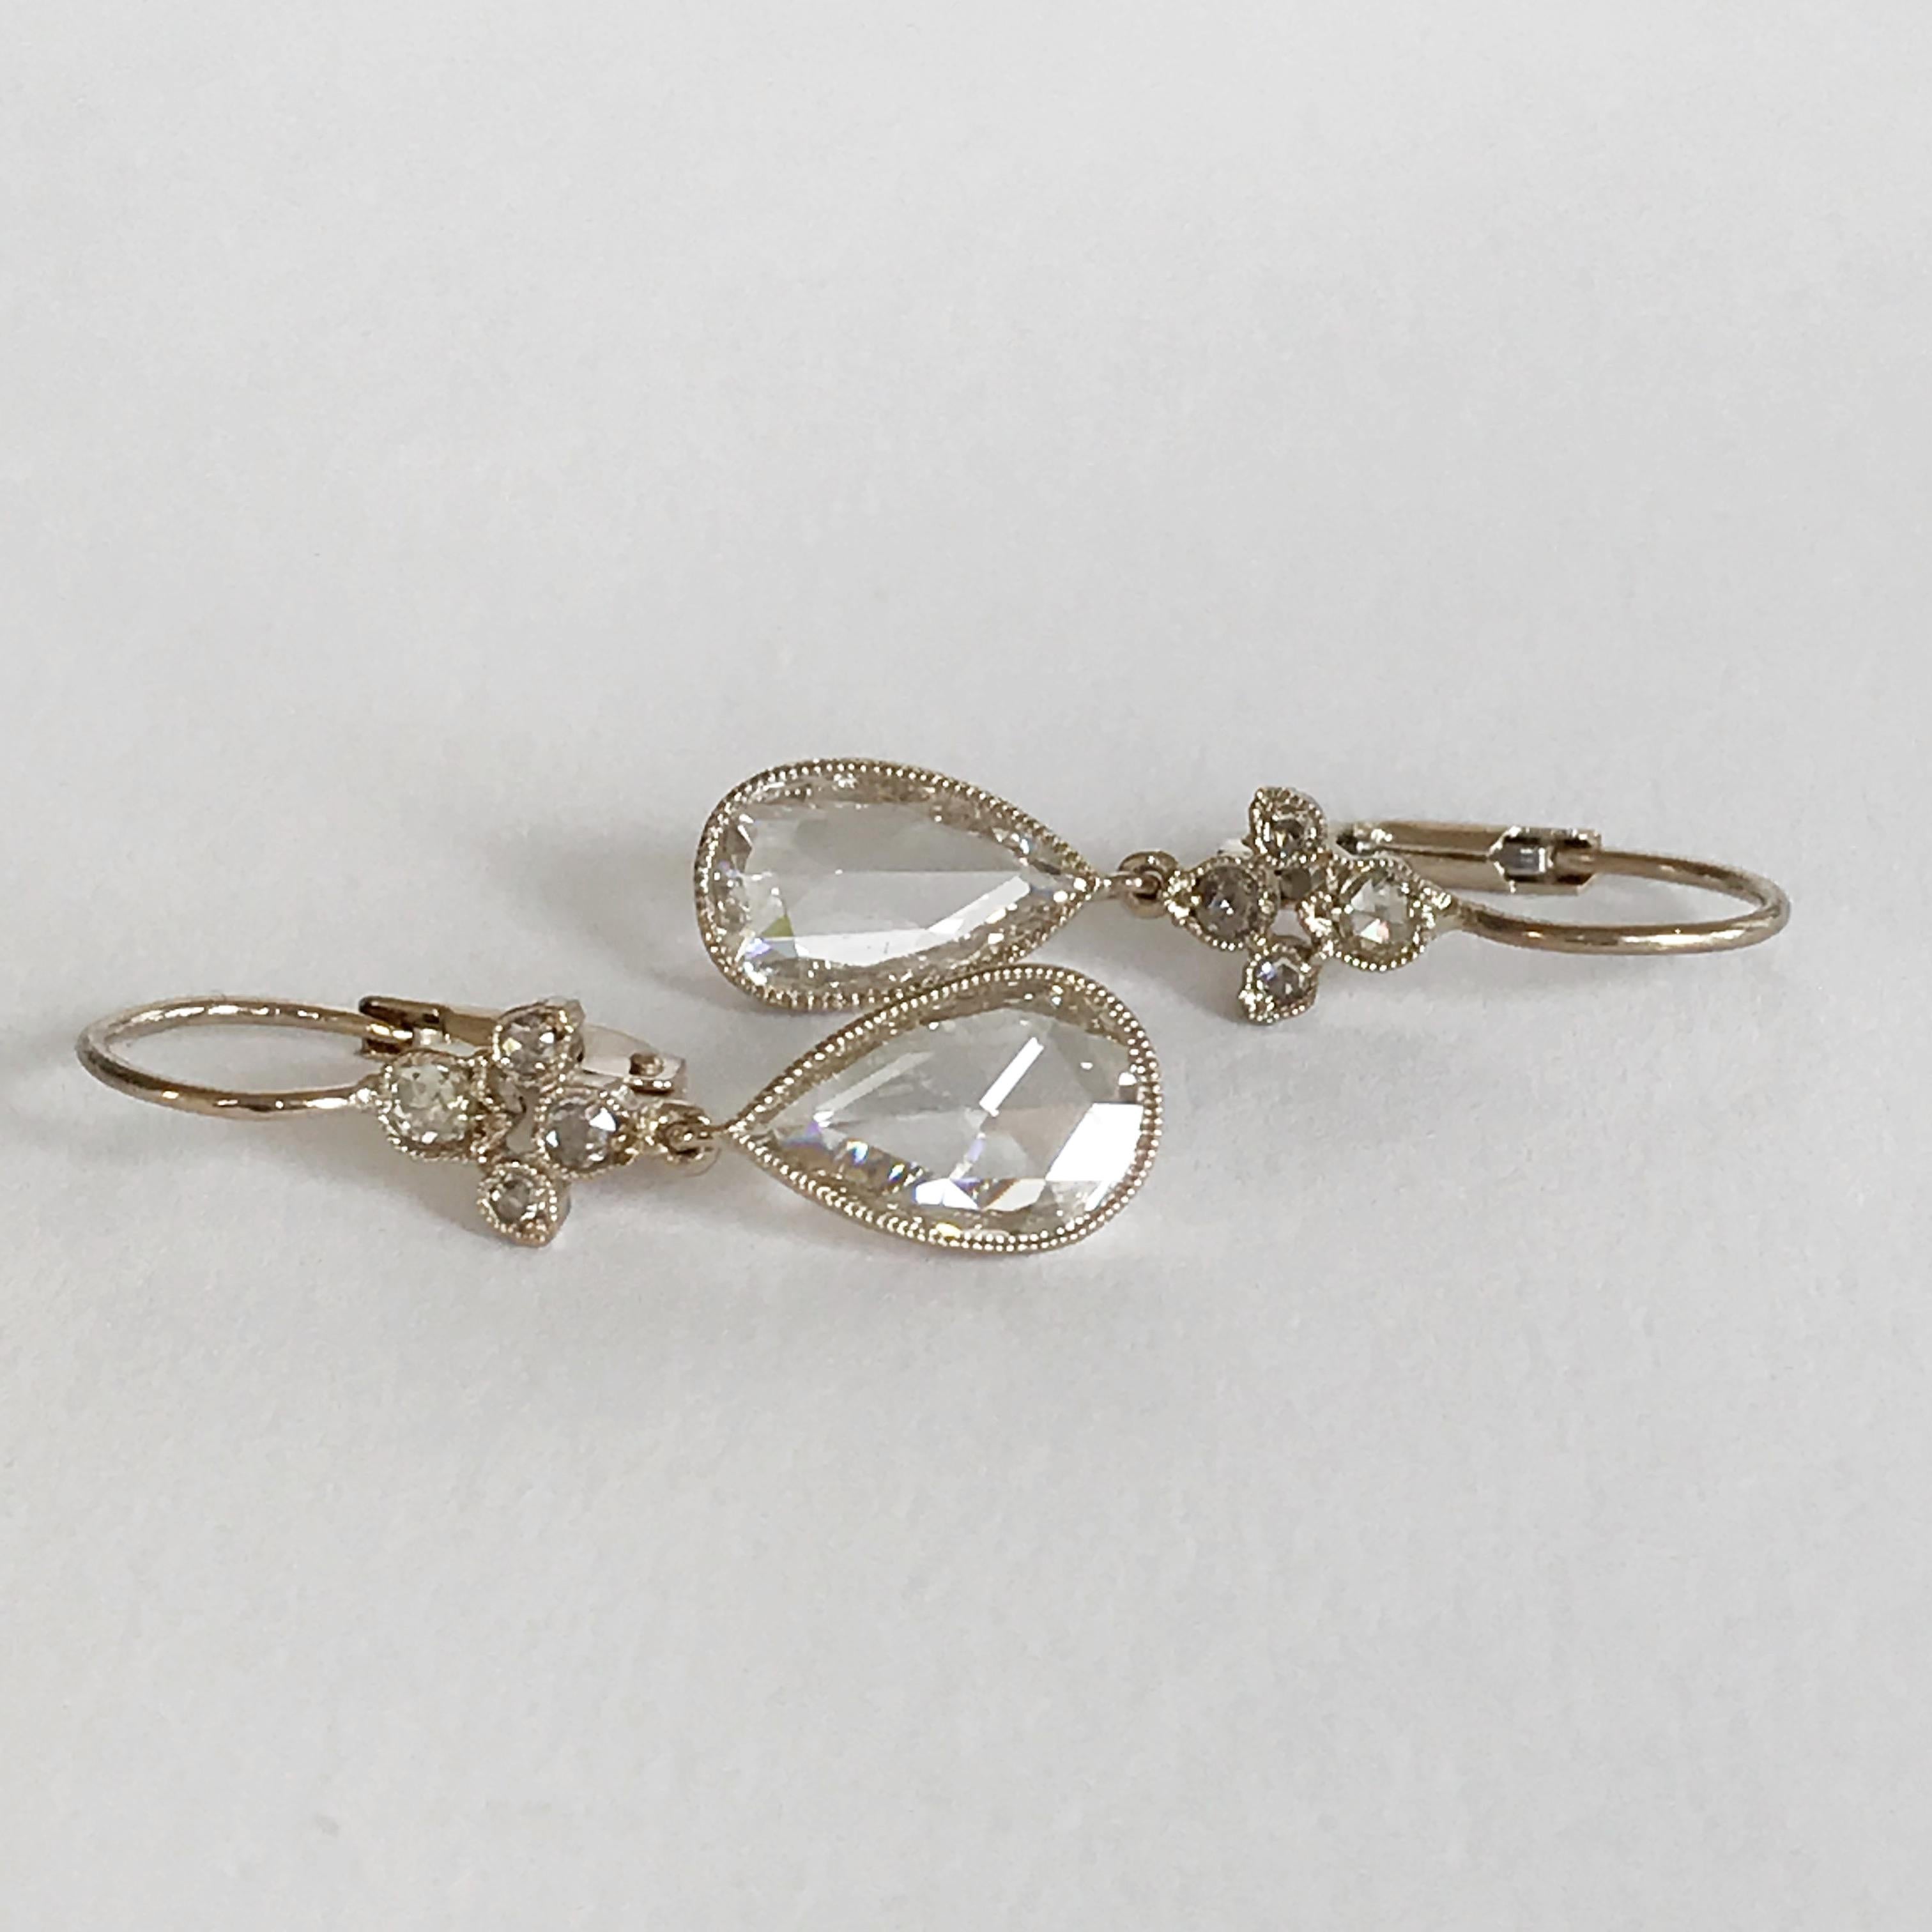 Dalben 2, 51 Carat Drop Rose Cut Diamond White Gold Earrings In New Condition For Sale In Como, IT